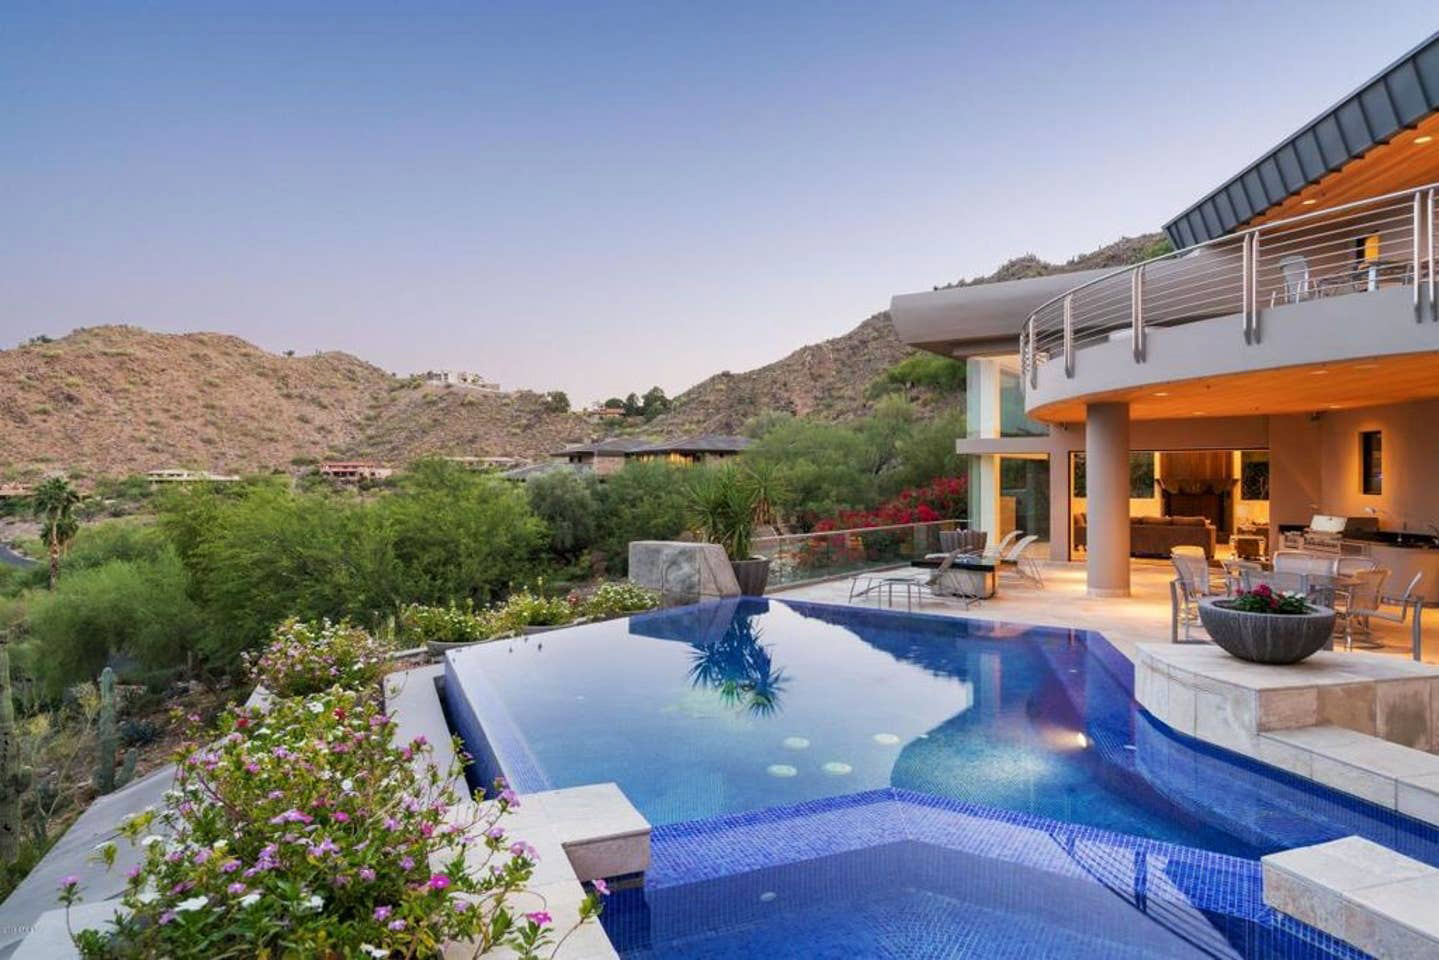 Vacation Rental in Scottsdale Arizona with a pool